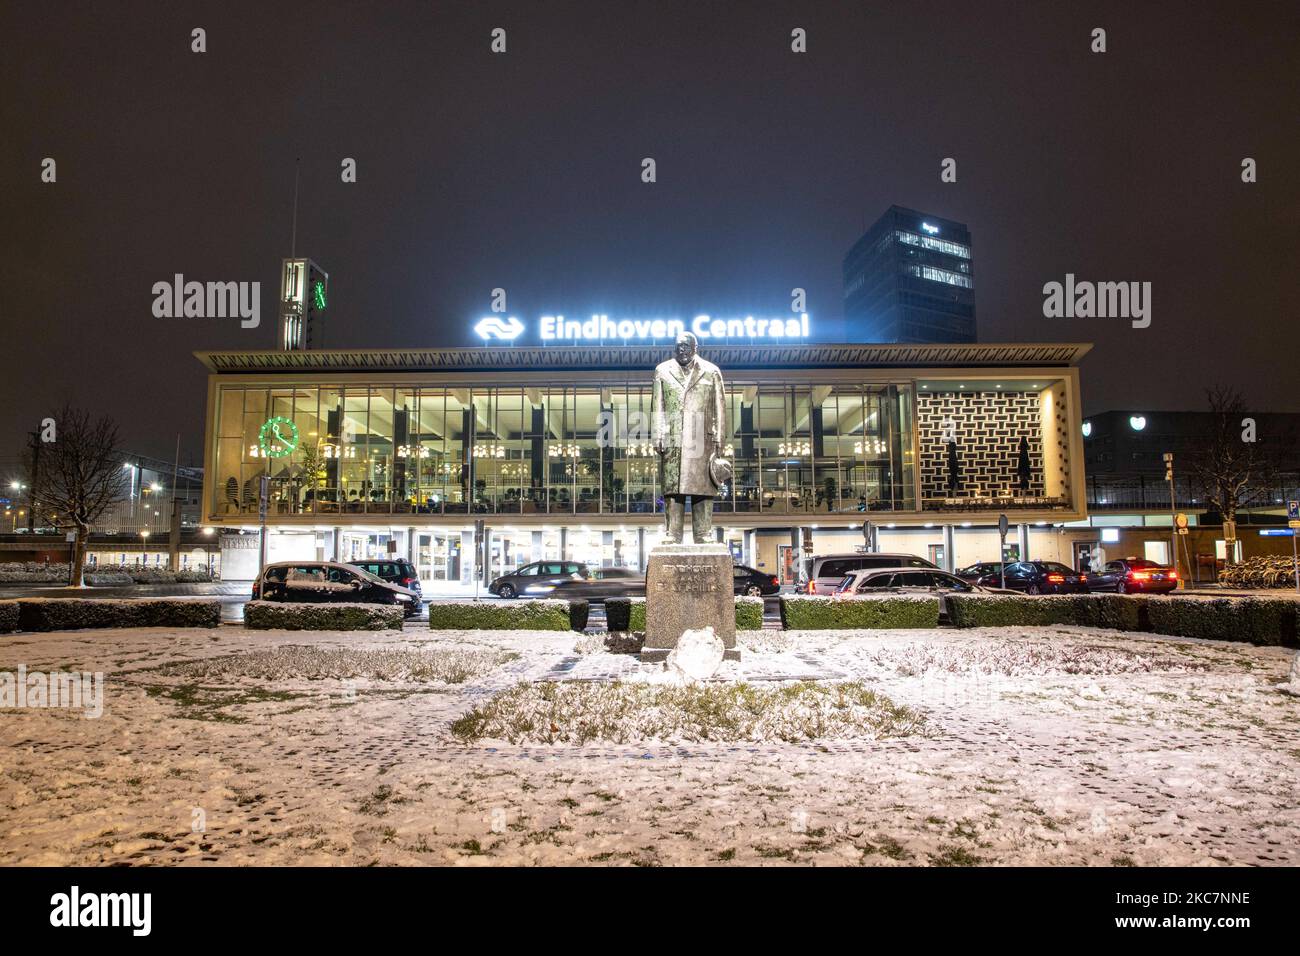 Eindhoven Centraal, the centra train station of the city with the inscription on top of it and the statue of Philips in front of the building as seen during the snowfall. Night long exposure photography images of snow-covered and illuminated with city lights Eindhoven city center after the snowfall. Daily life in the Netherlands with the first snowfall of the year covering almost everything the cold weather shows subzero temperature. The chilly condition with snow and ice changed soon according to the forecast, the freezing condition will not last more than a day. Eindhoven, the Netherlands on Stock Photo